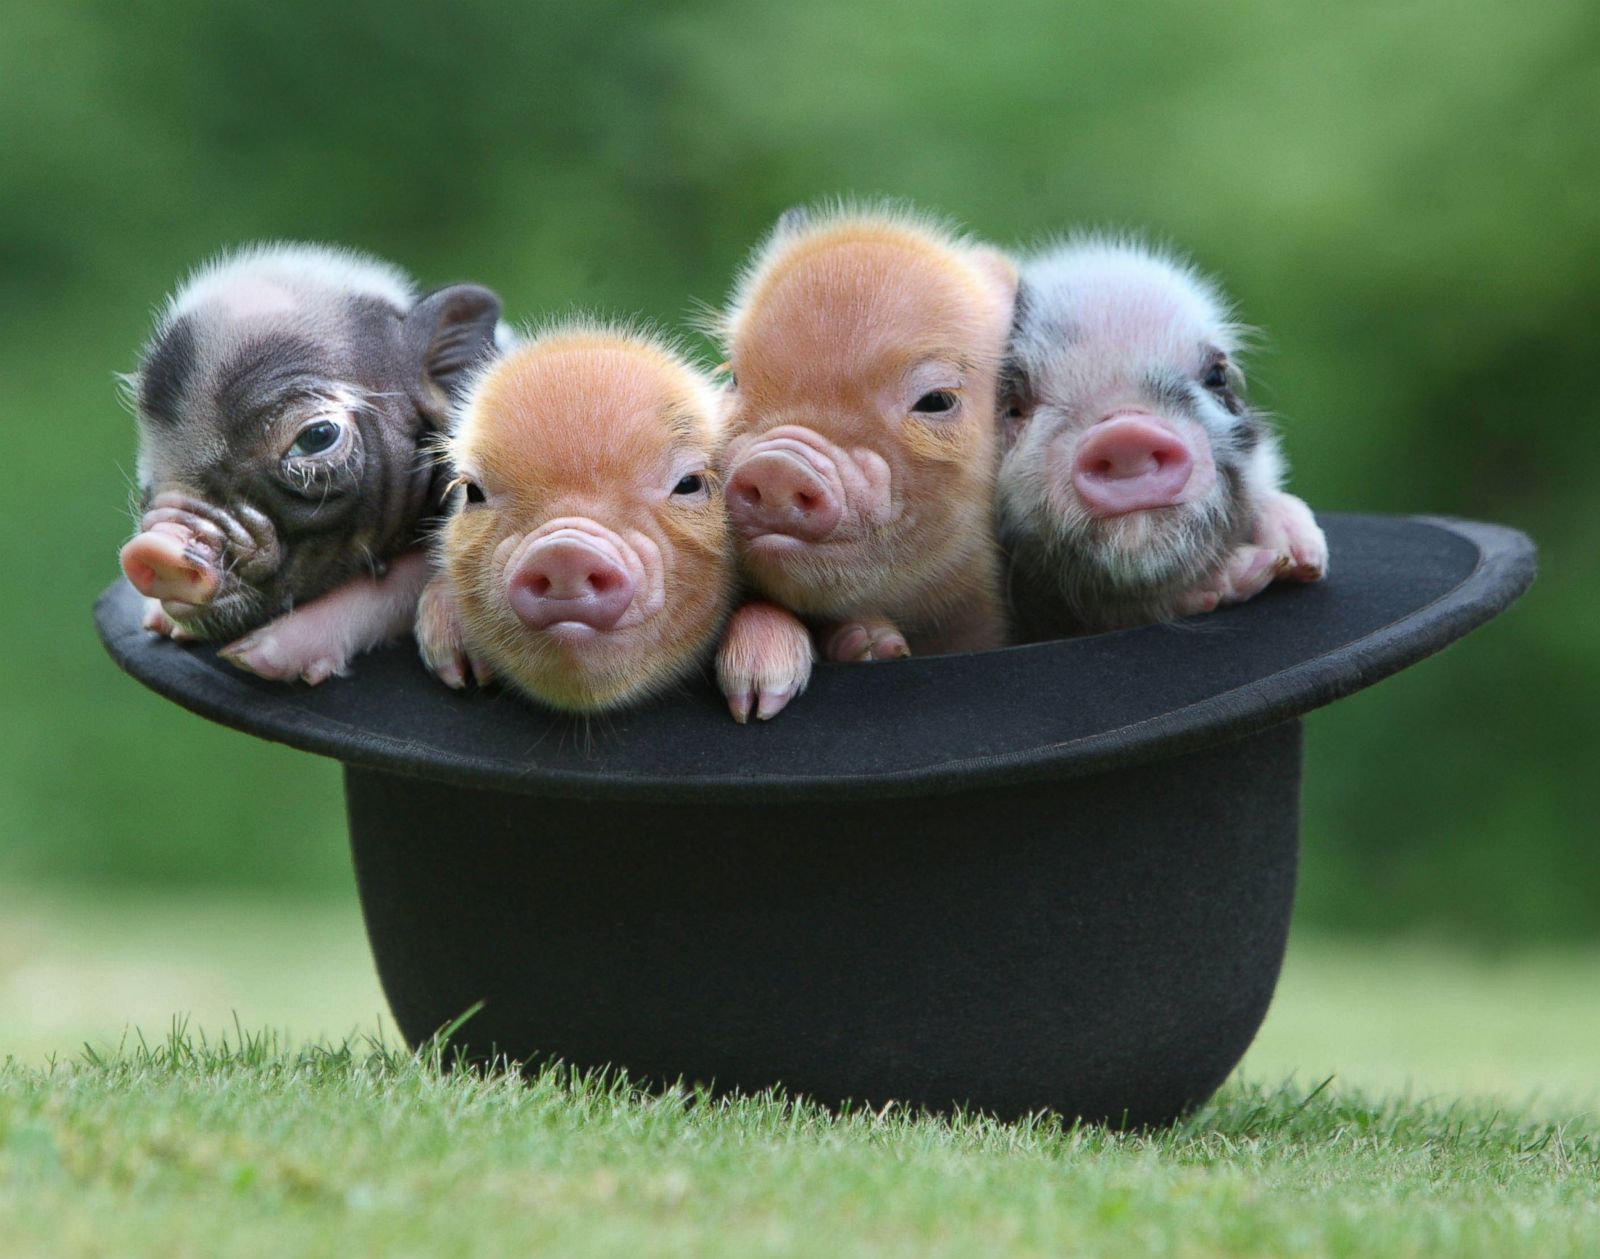 Most Adorable Micro Pig Photo Ever! Photo